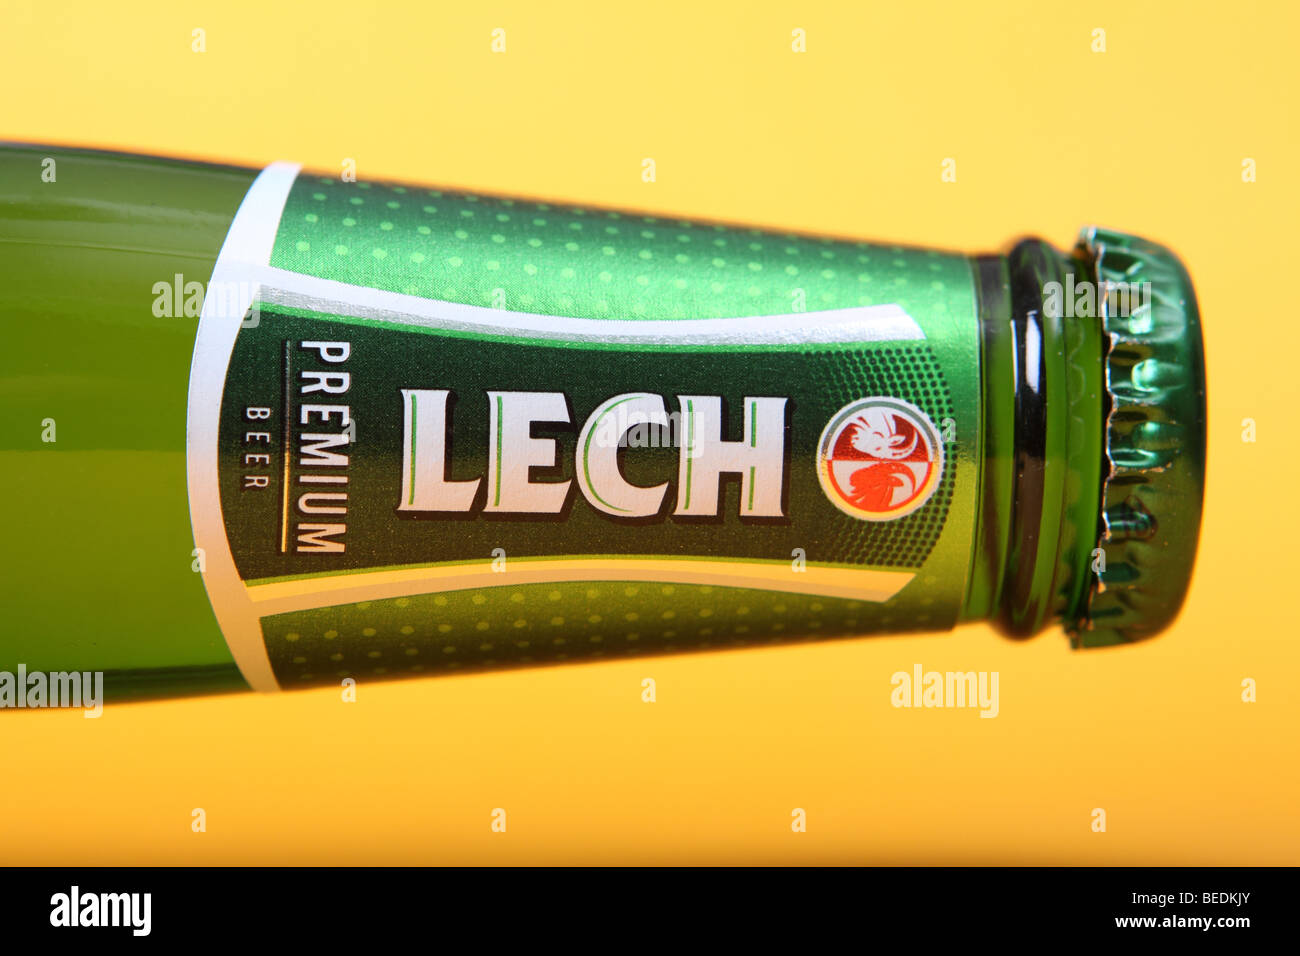 Lech Polish beer bottle and brand label brewed in the city of Poznan Stock Photo